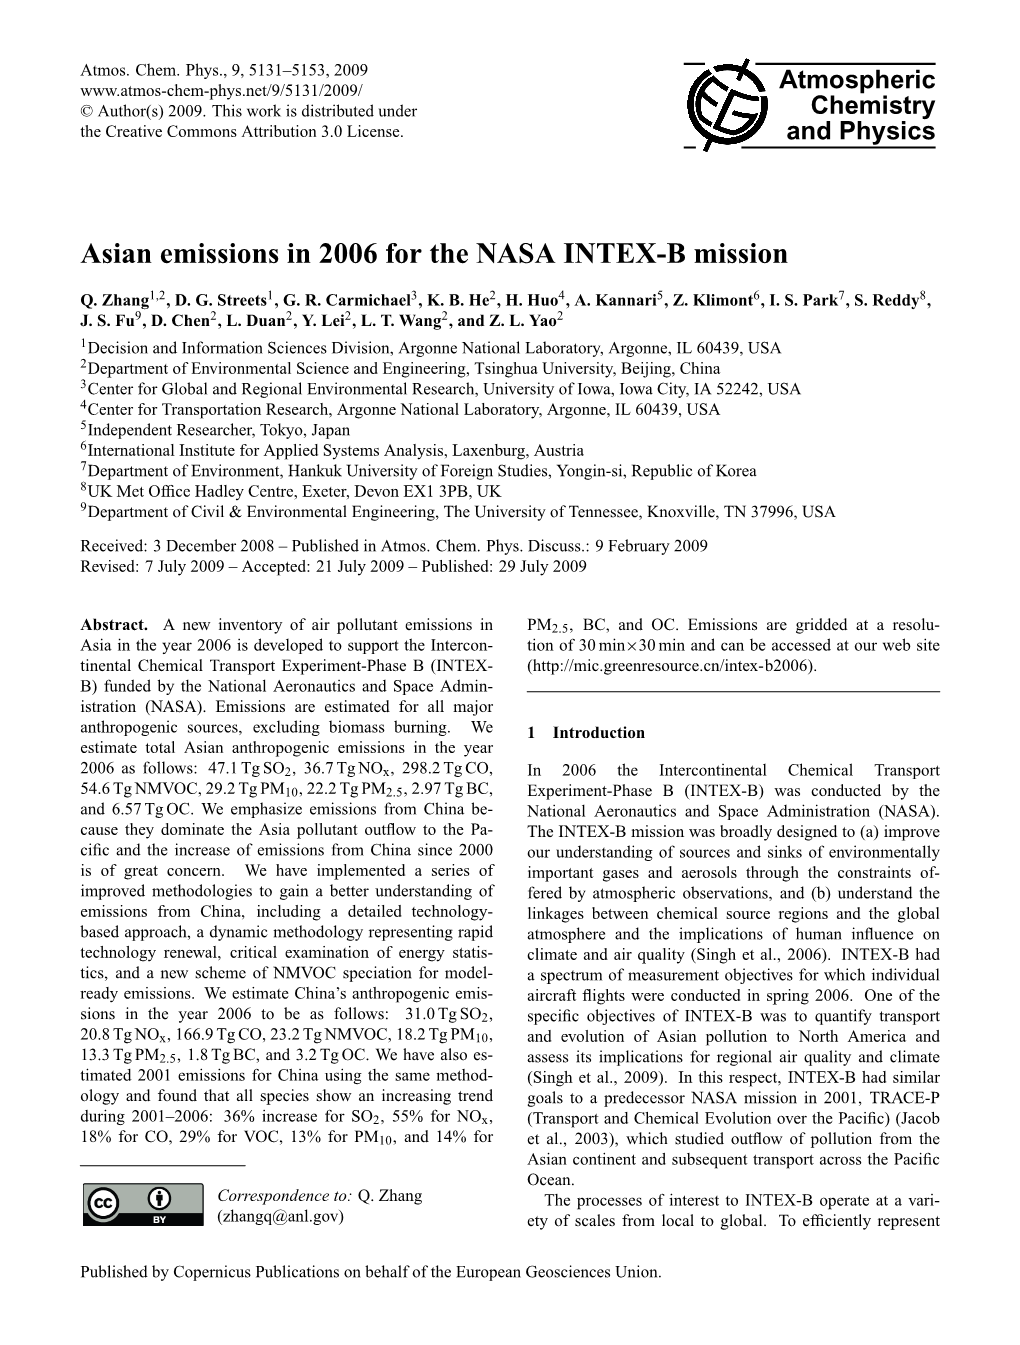 Asian Emissions in 2006 for the NASA INTEX-B Mission